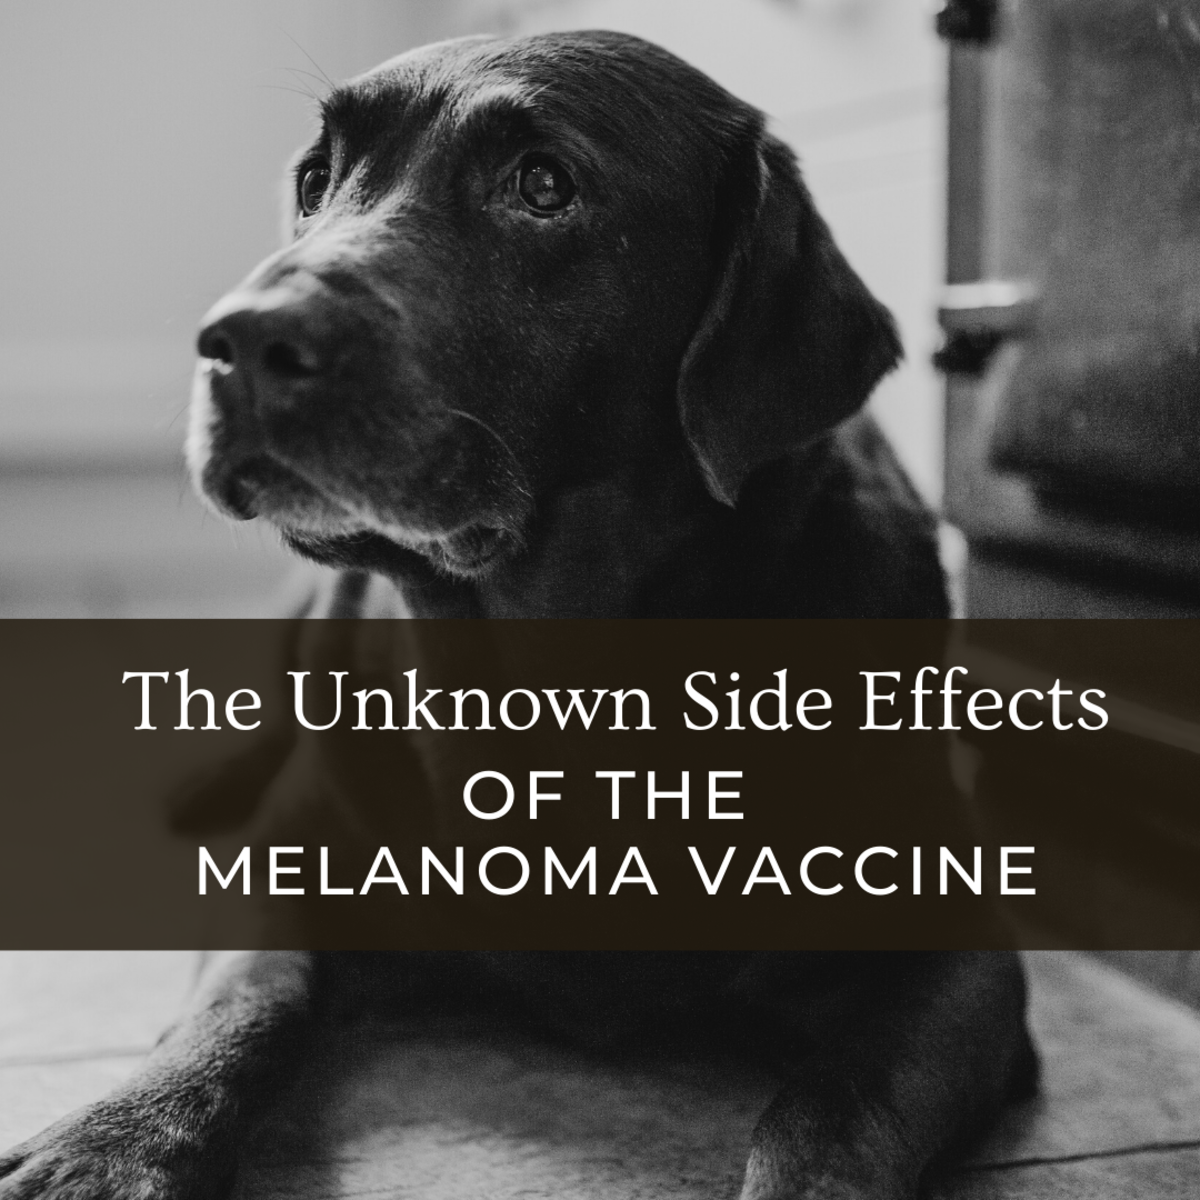 Possible Side Effects of the Melanoma Vaccine